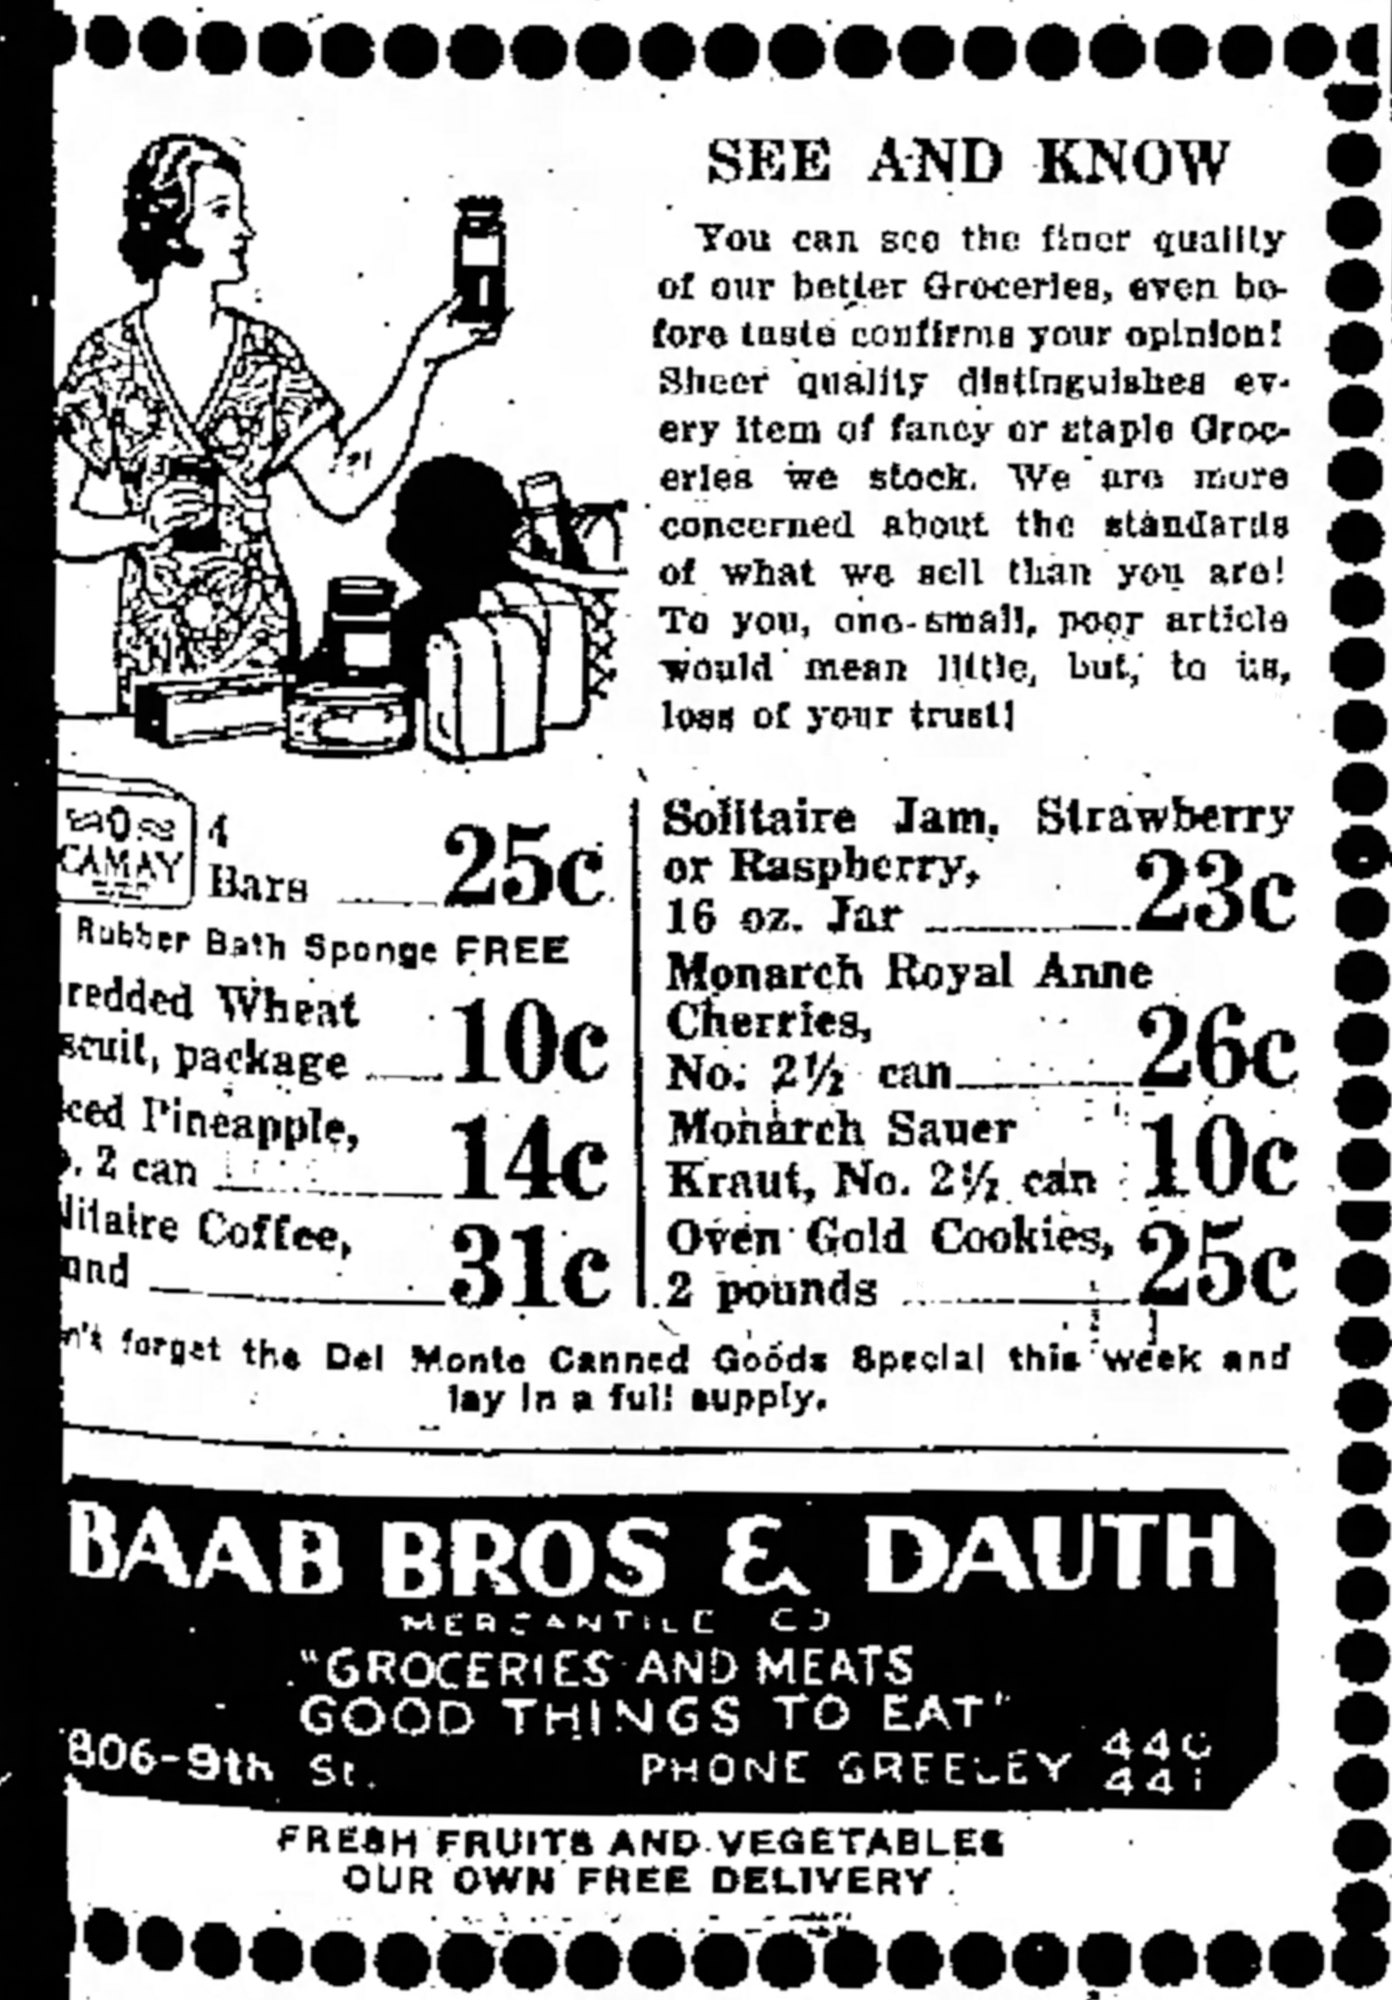 Dauth Family Archive - 1933-06-23 - Greeley Daily Tribune - Baab Bros and Dauth Advertisement